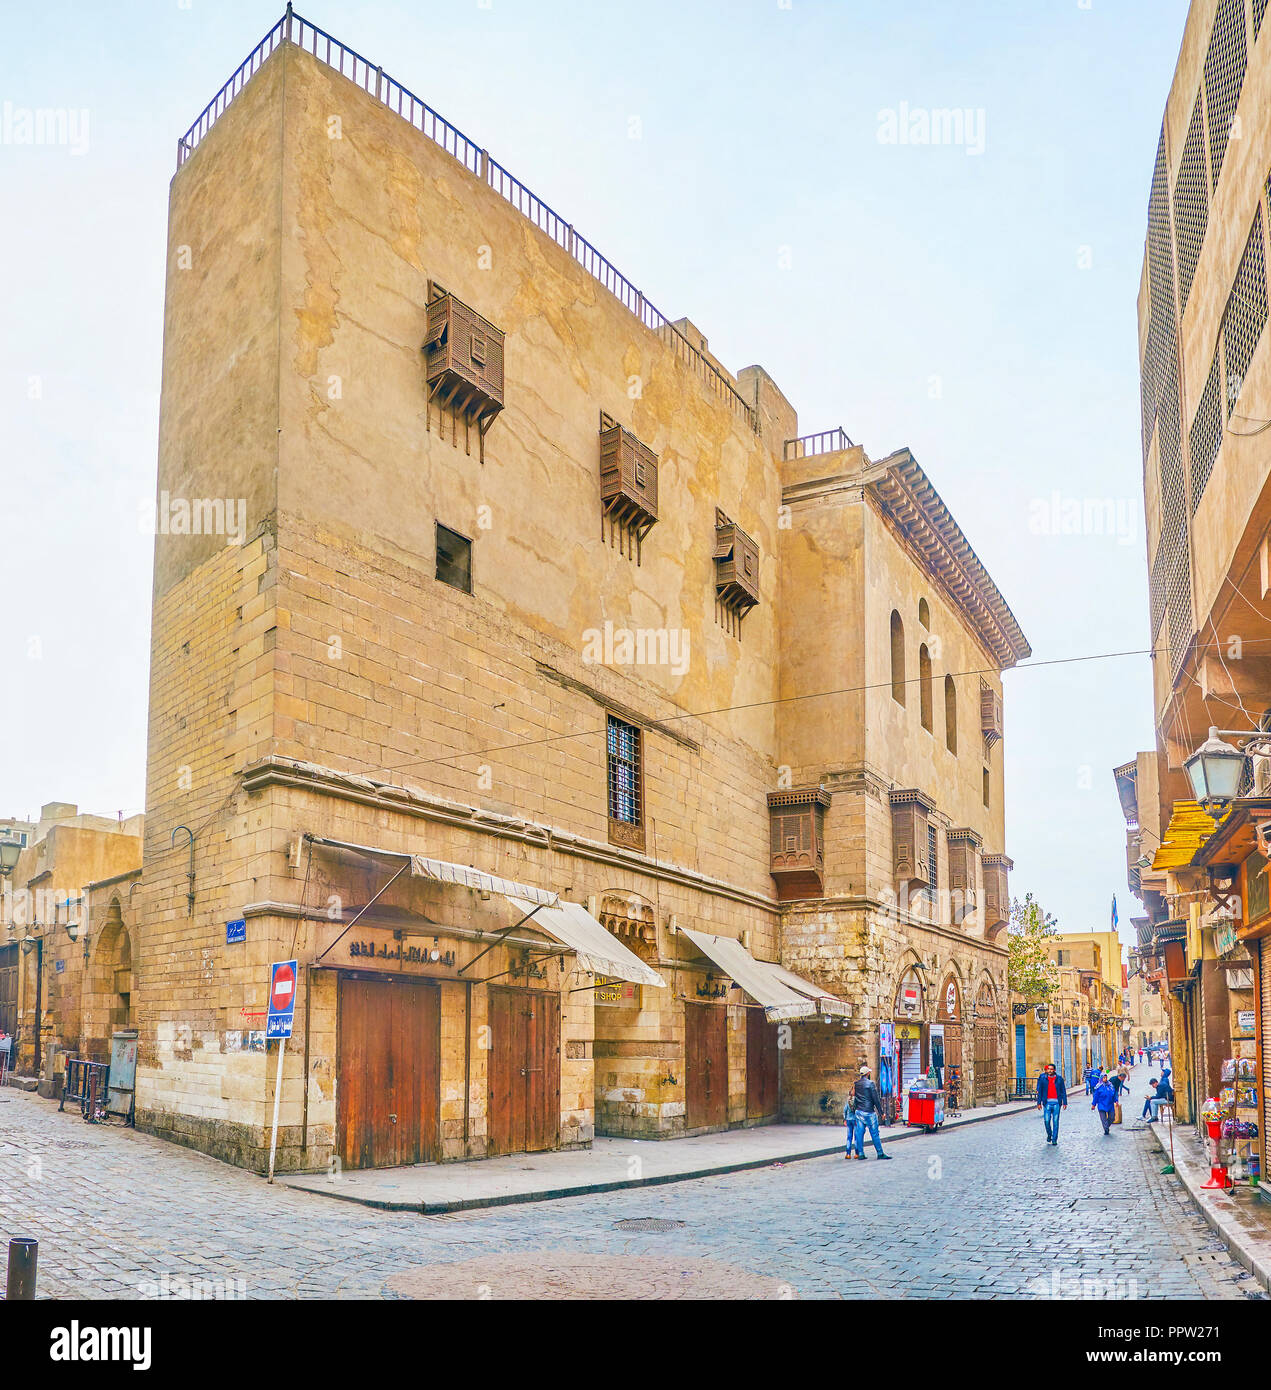 CAIRO, EGYPT - DECEMBER 23, 2017: The side wall of medieval Beshtak Palace with latticework balconies and shops on the ground floor on Al-Muizz Street Stock Photo